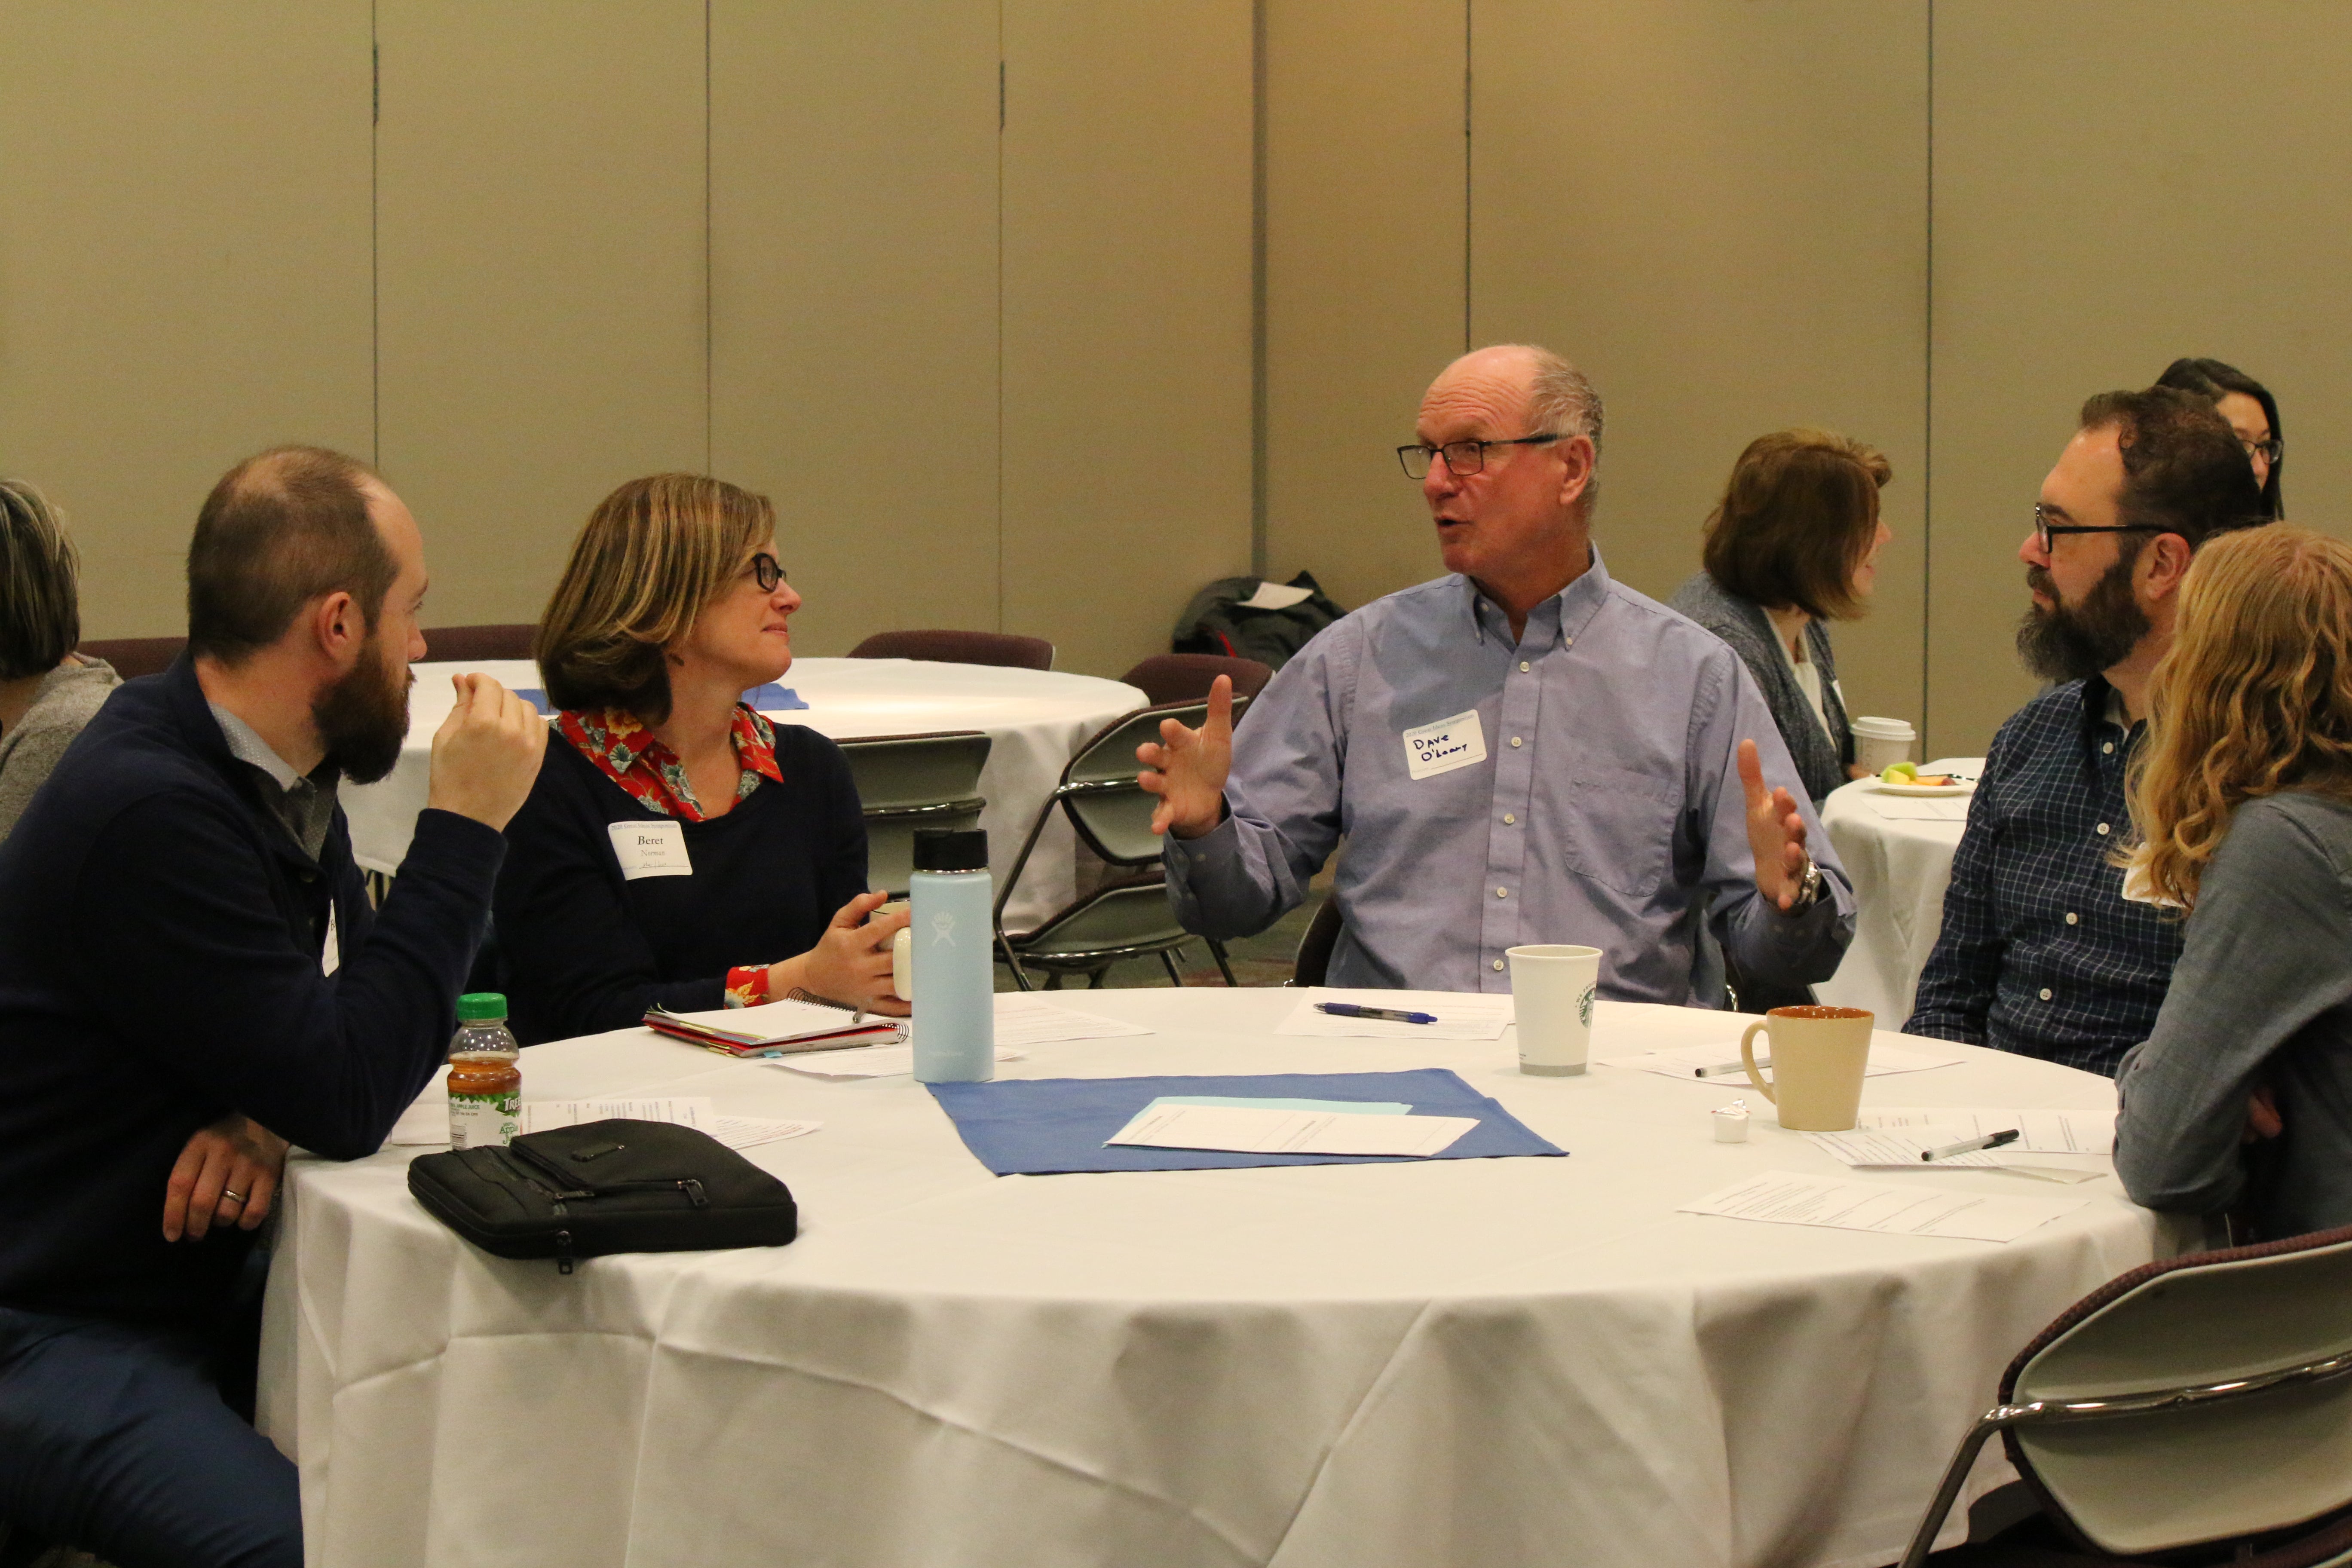 Faculty at Boise State seated at a table, discussing teaching practices